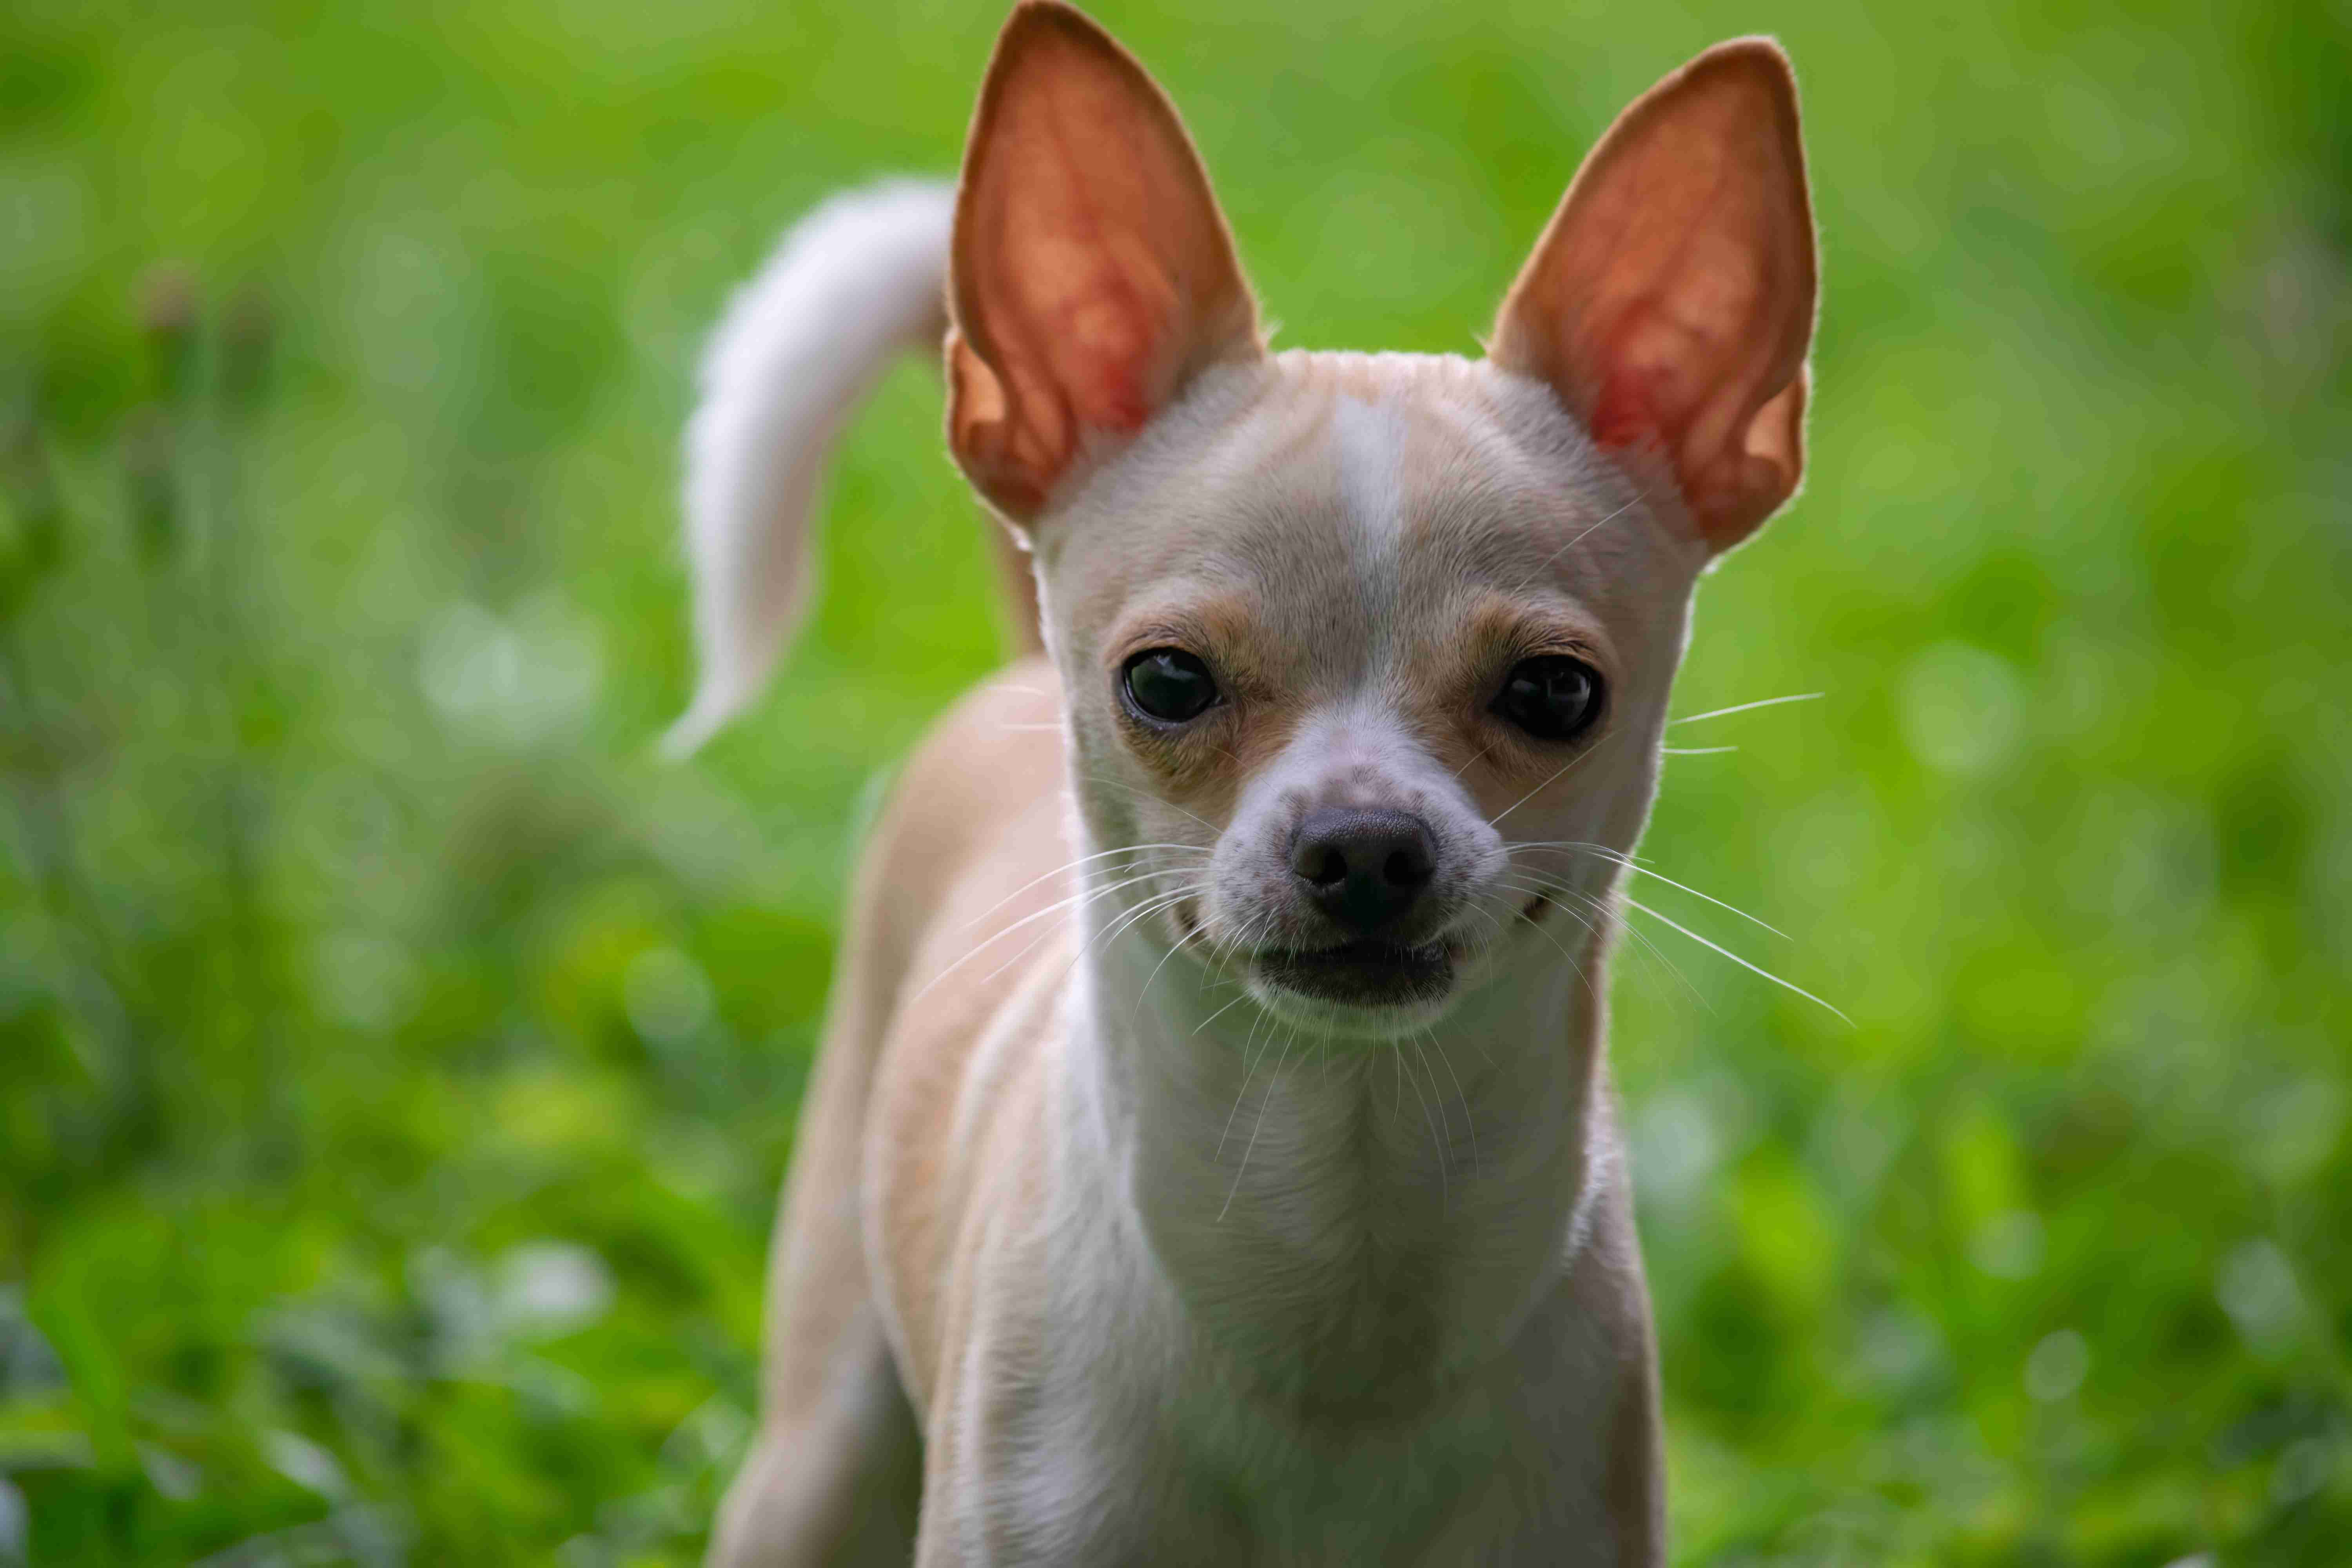 How can you establish a consistent routine to help manage a Chihuahua's anger issues?